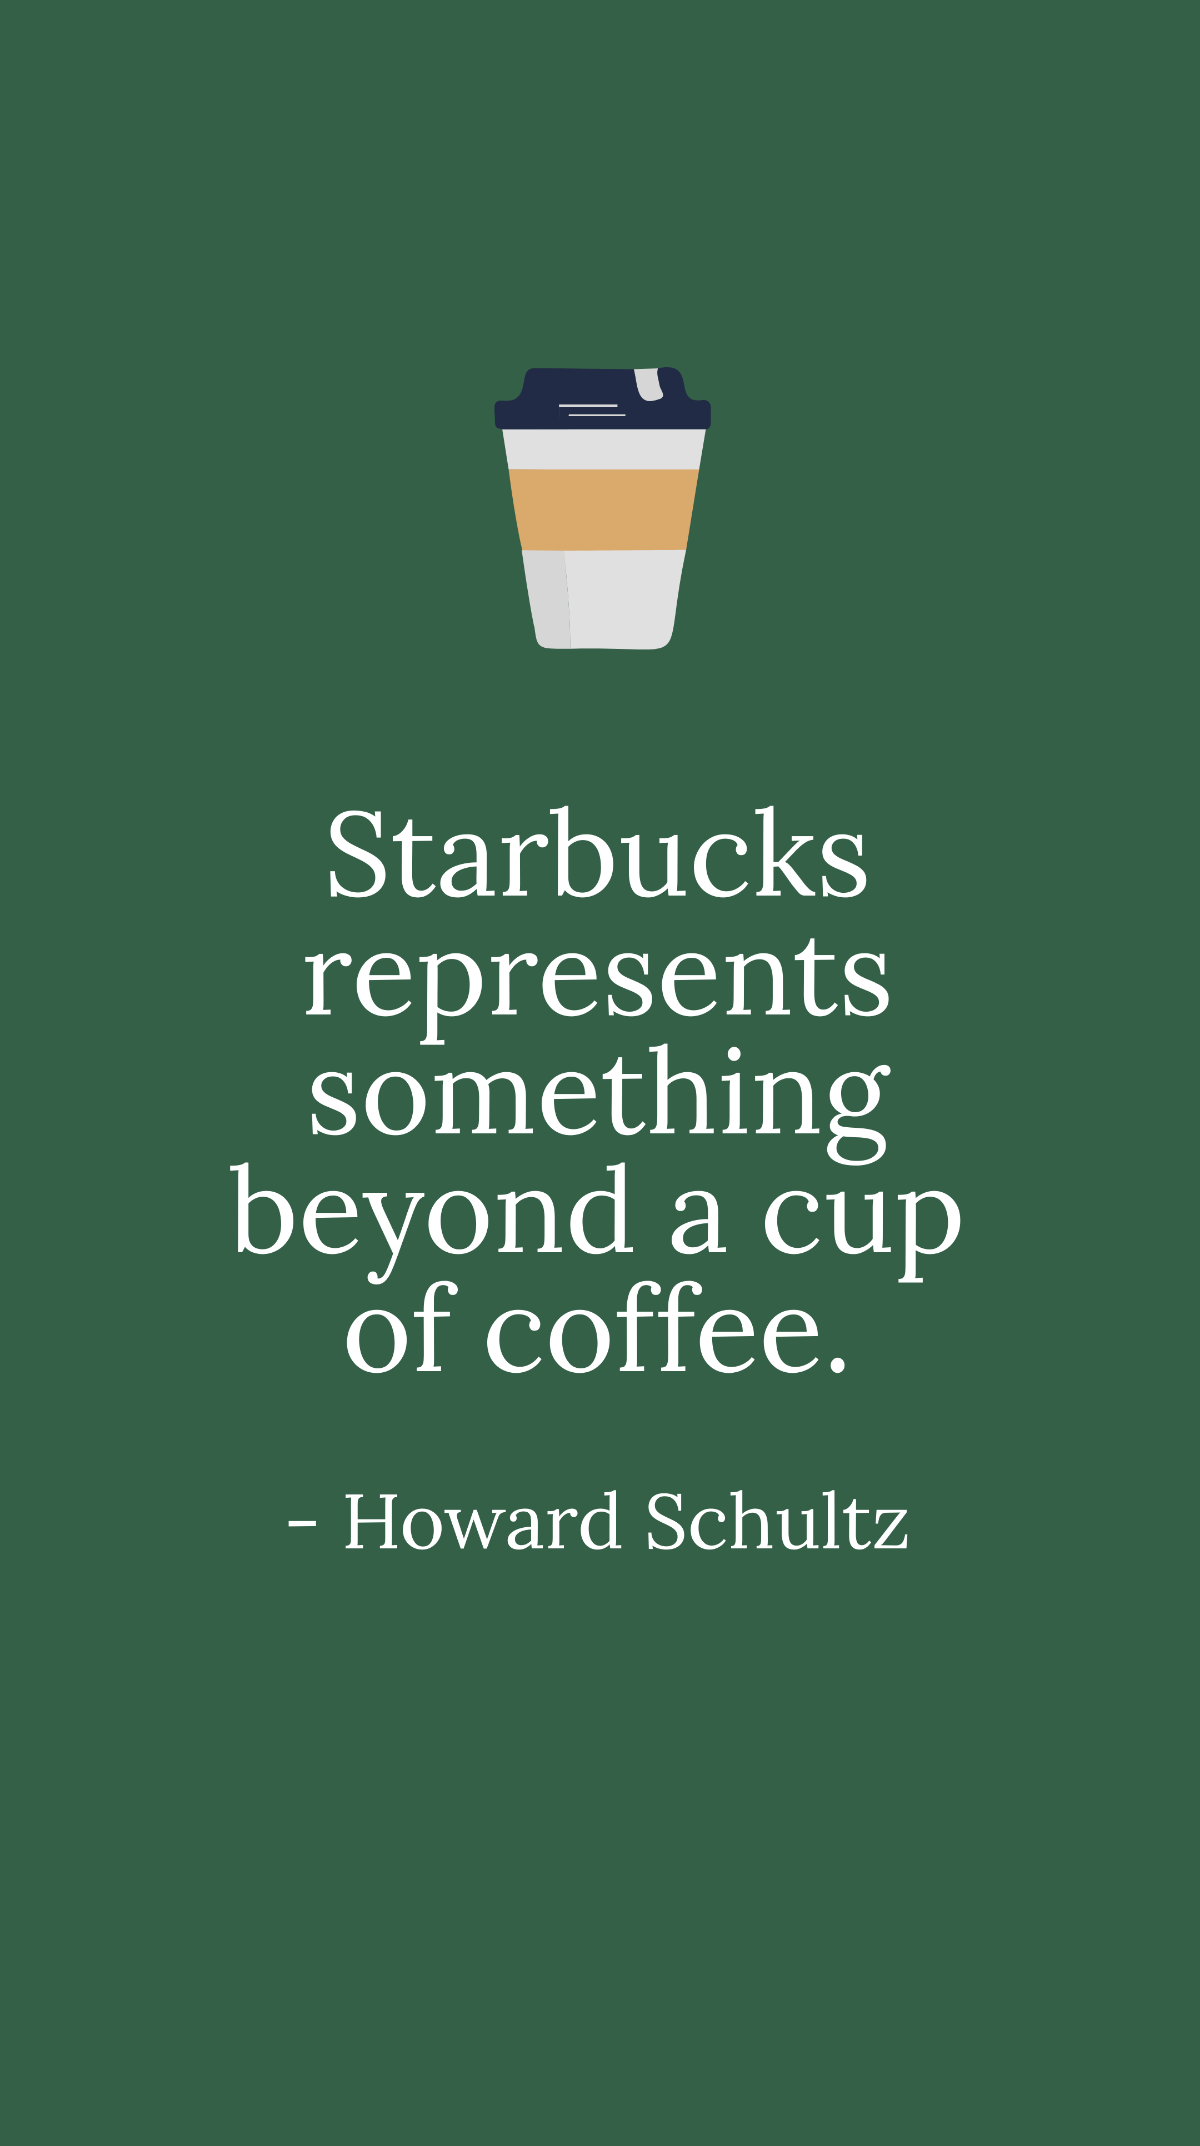 Free Howard Schultz - Starbucks represents something beyond a cup of coffee. Template